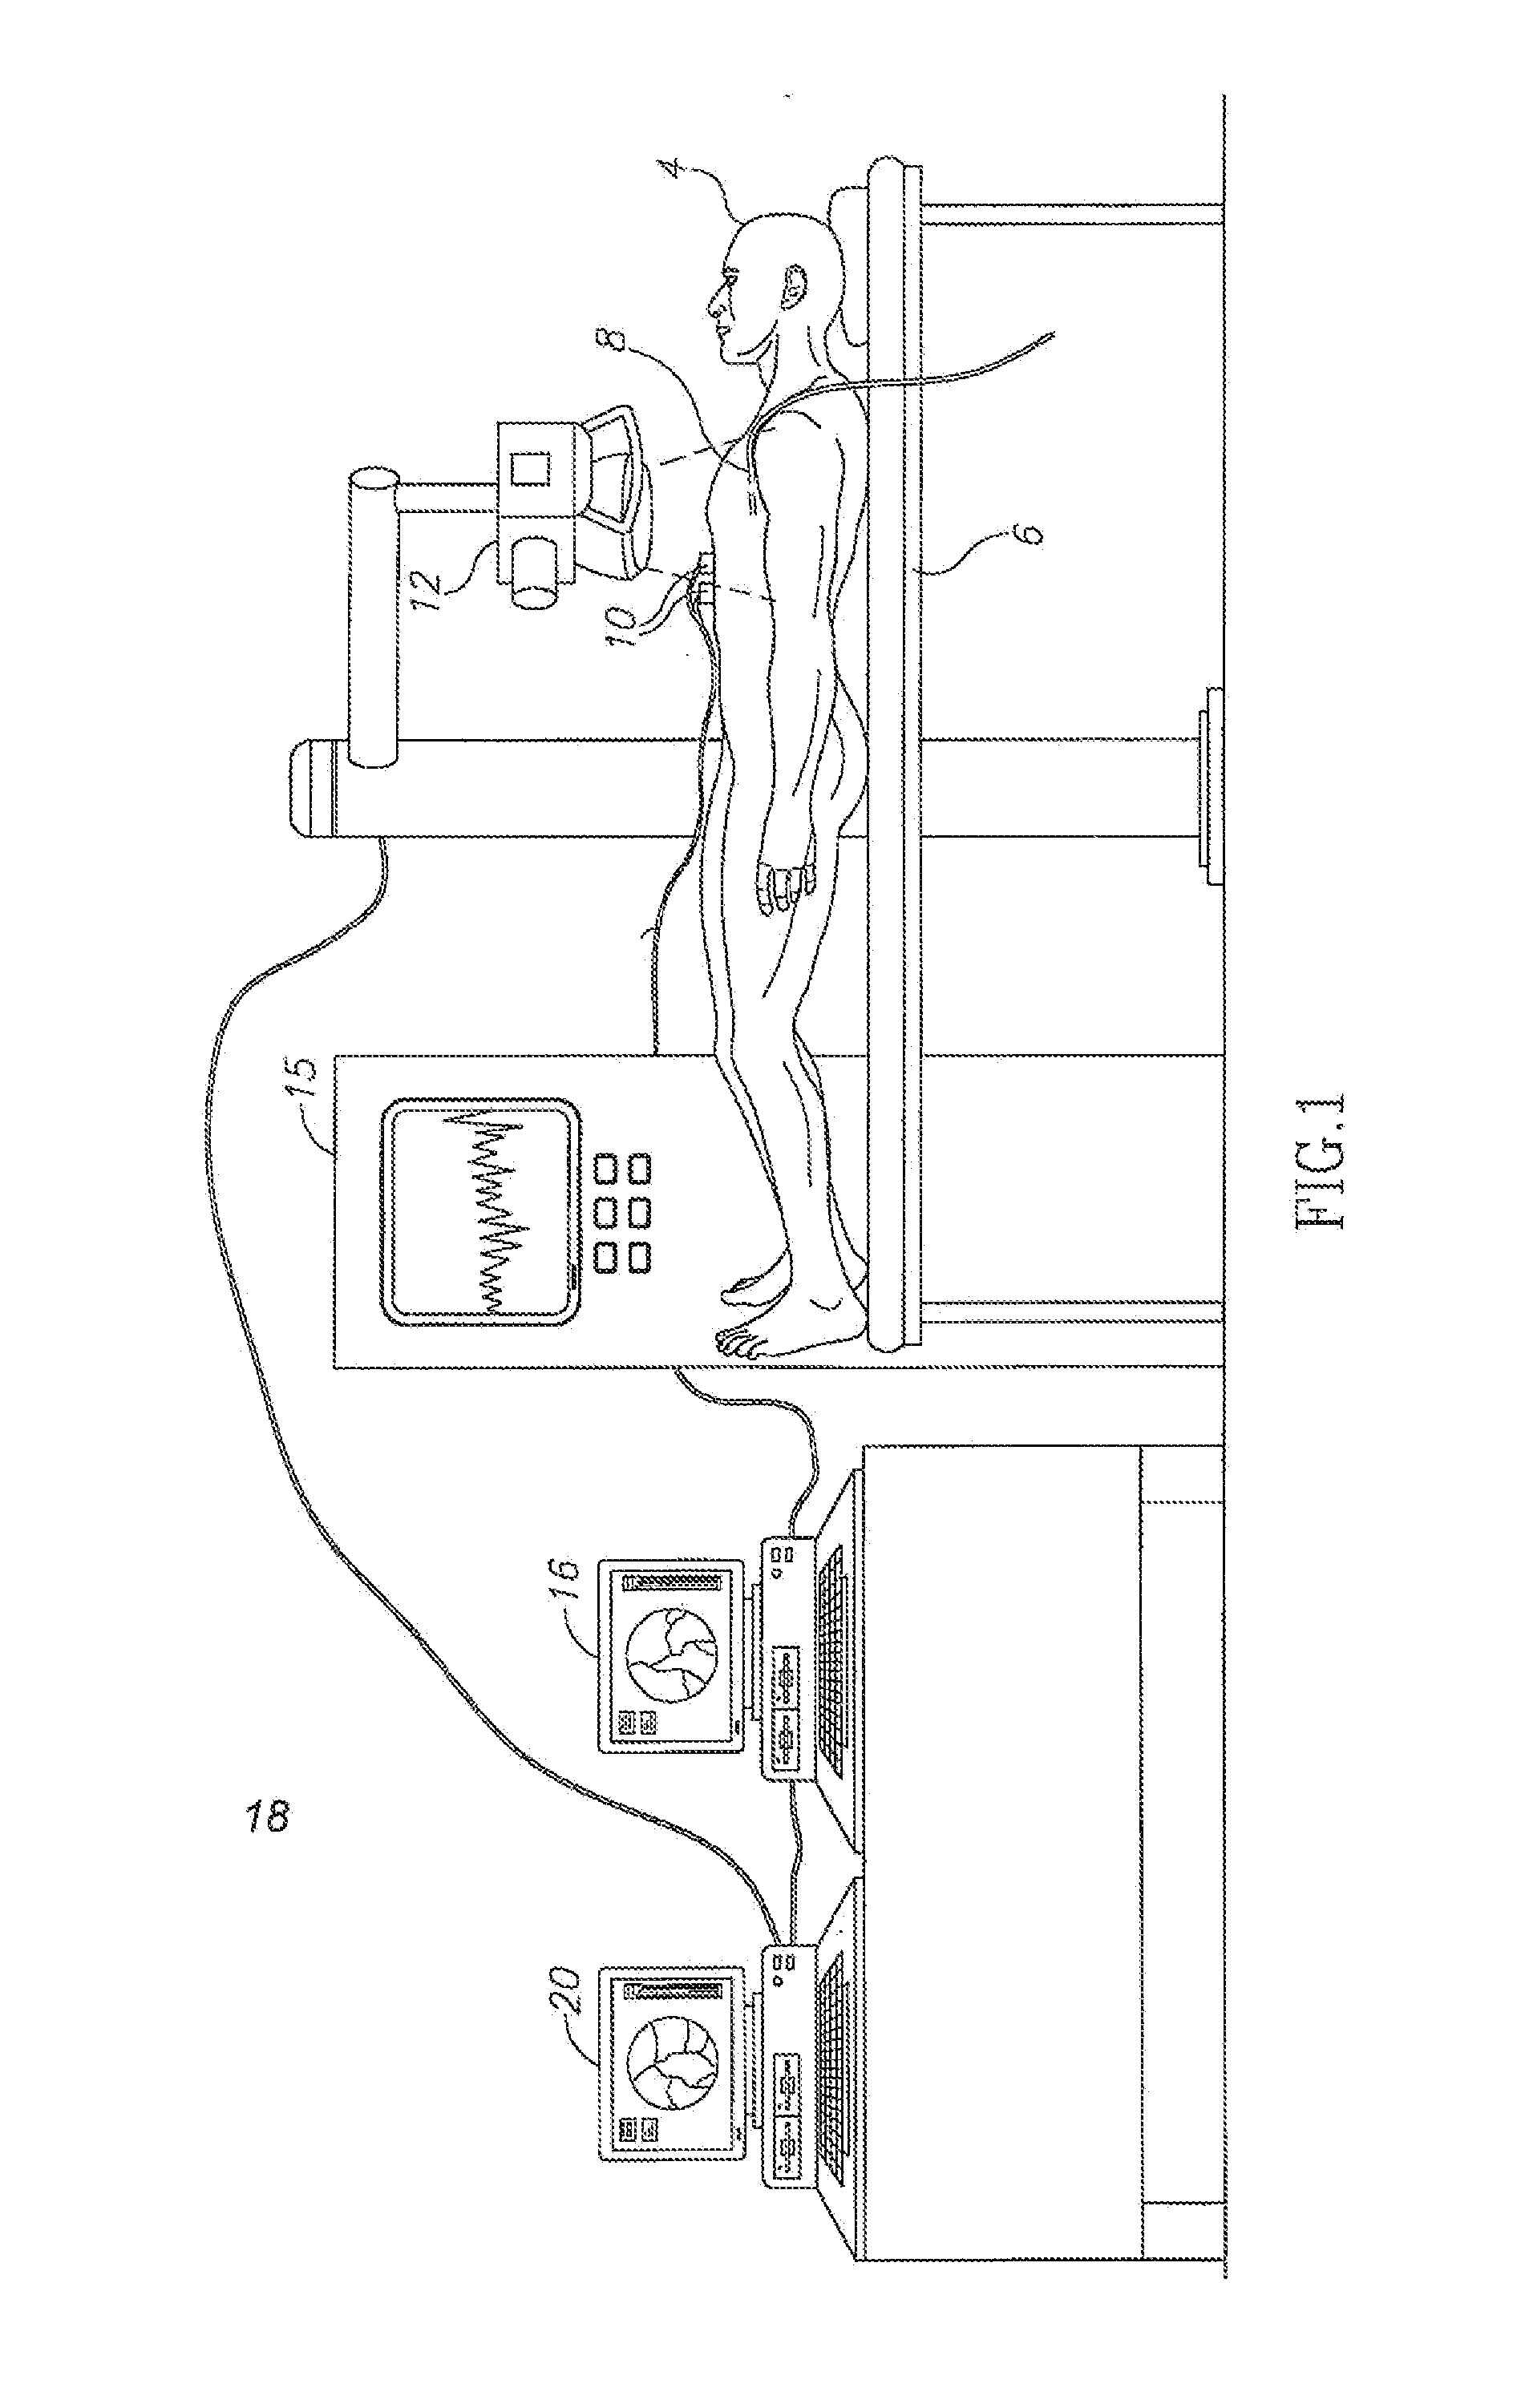 Method and system for detecting and analyzing heart mecahnics